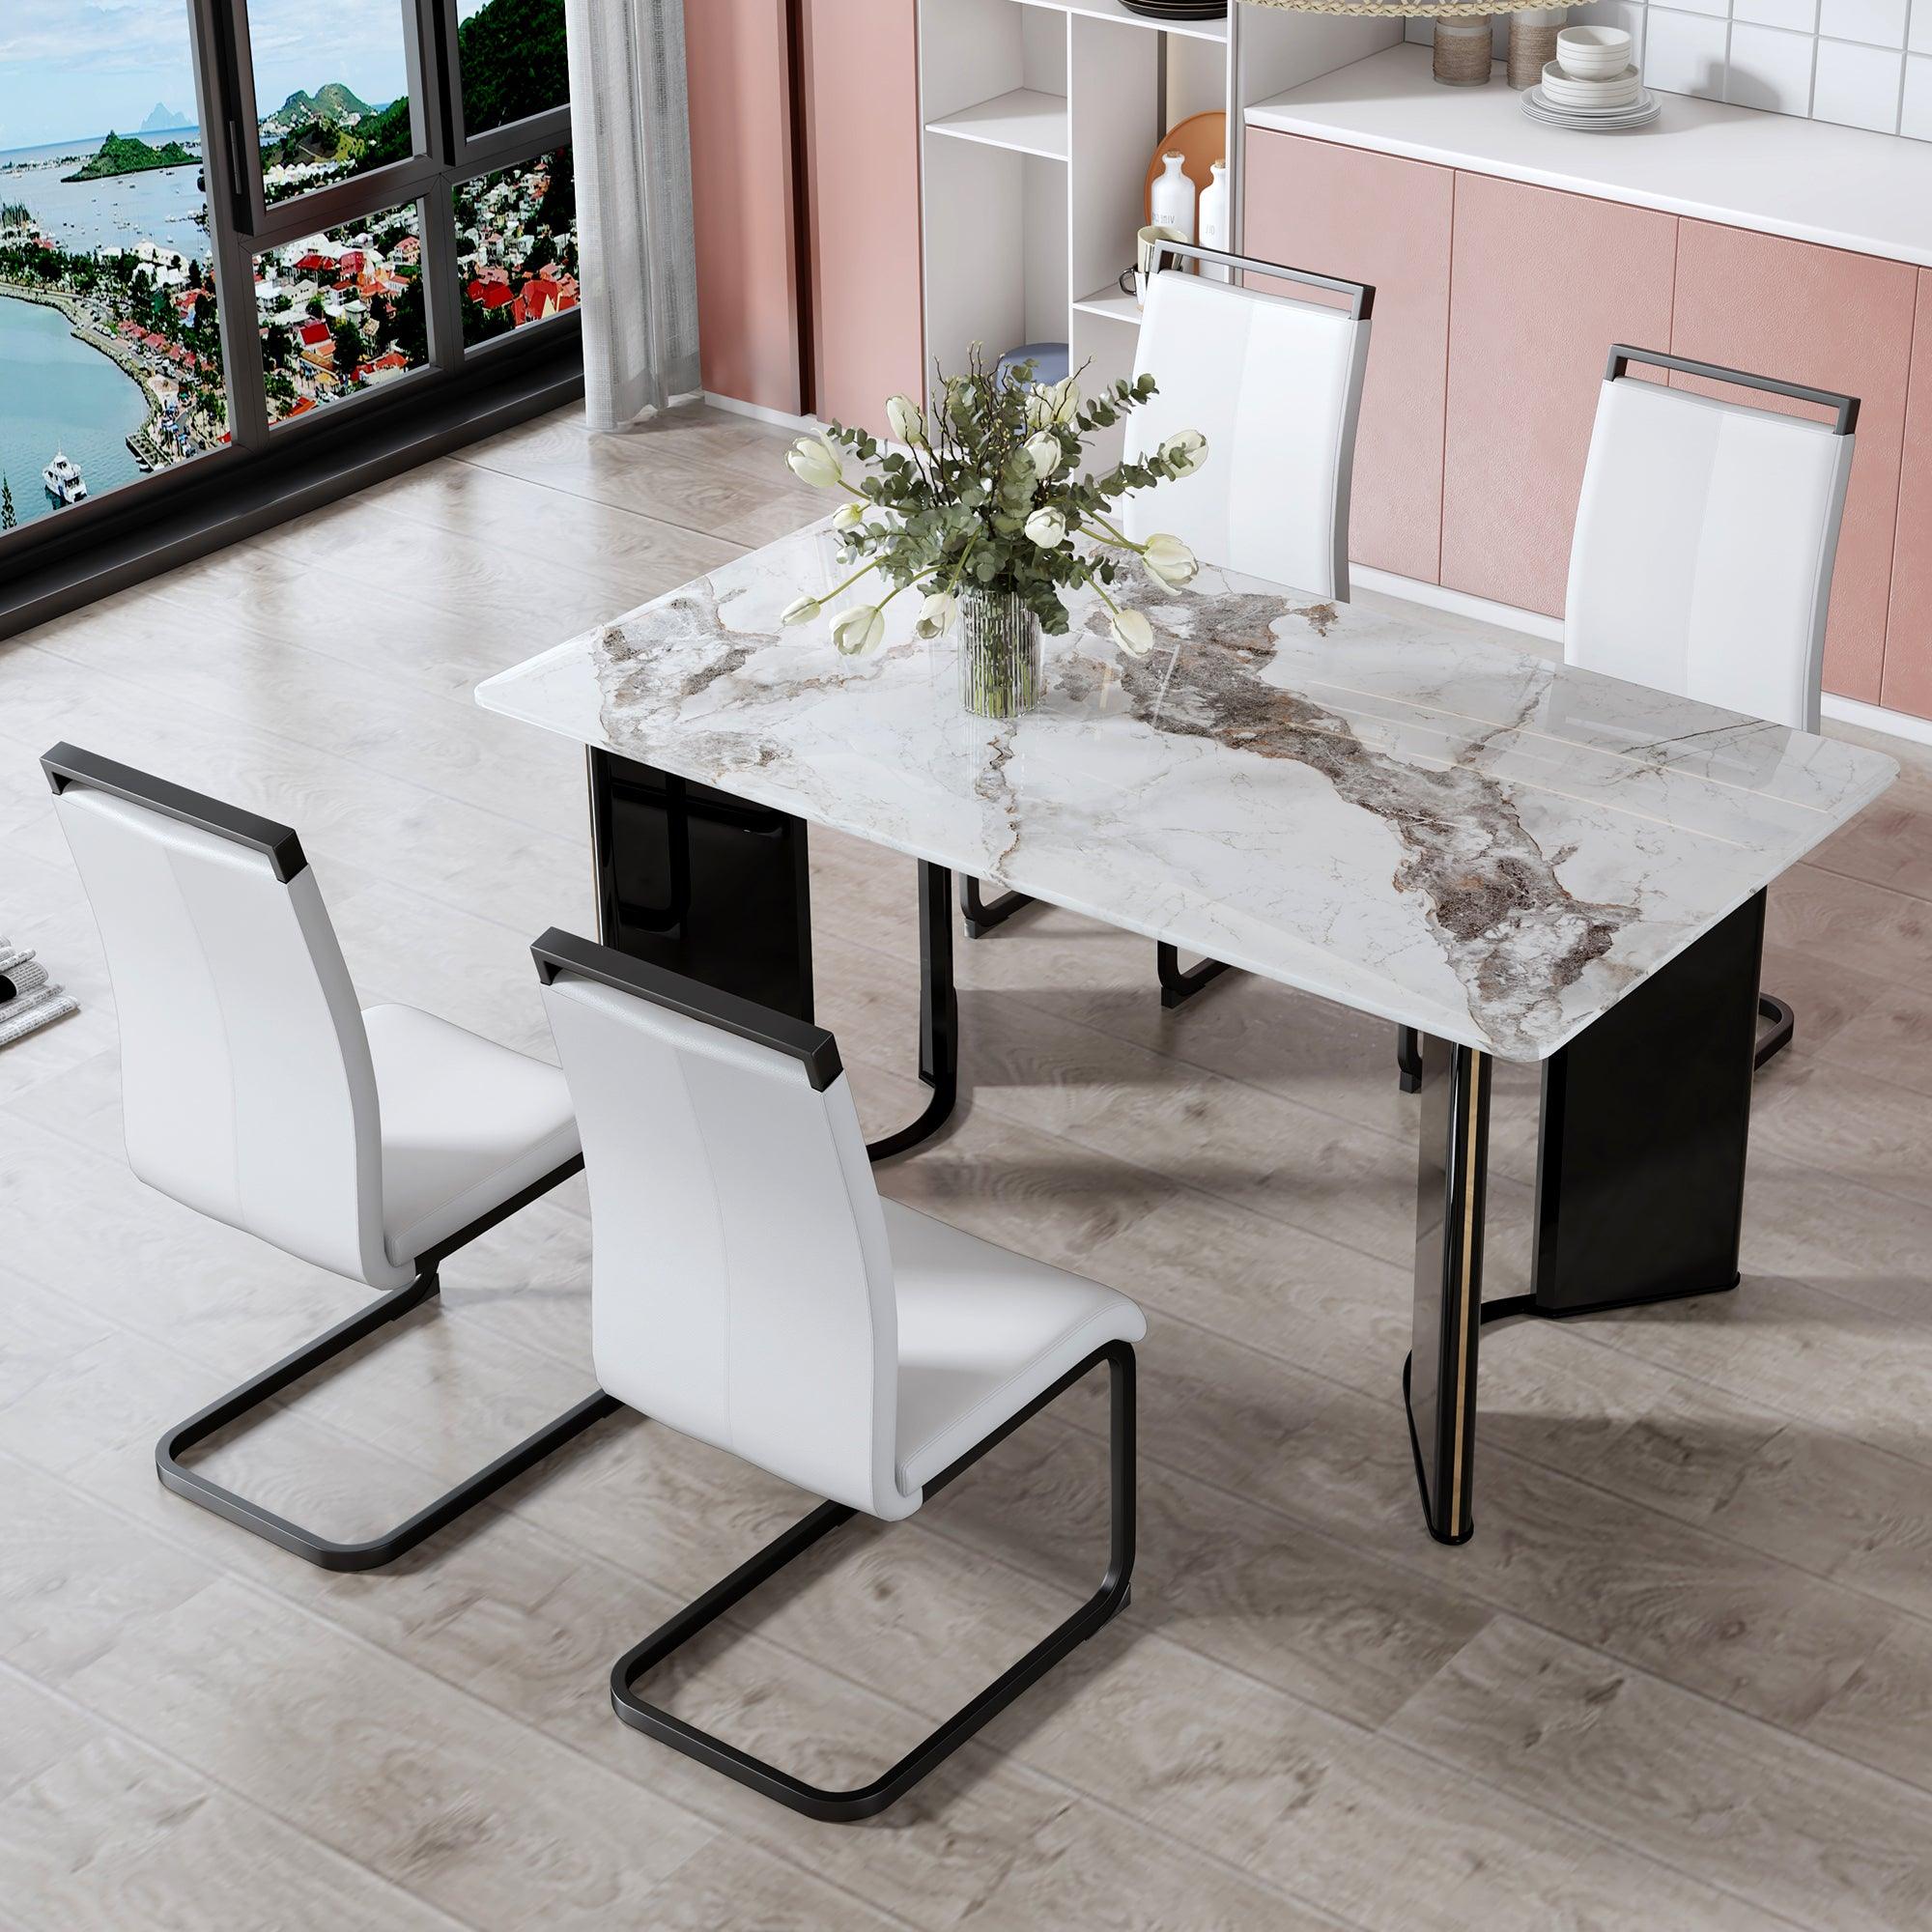 🆓🚛 Table & Chair Set, White Imitation Marble Desktop With Mdf Legs & Gold Metal Decorative Strips, 4 Dining Chairs With White Backrest & Black Metal Legs